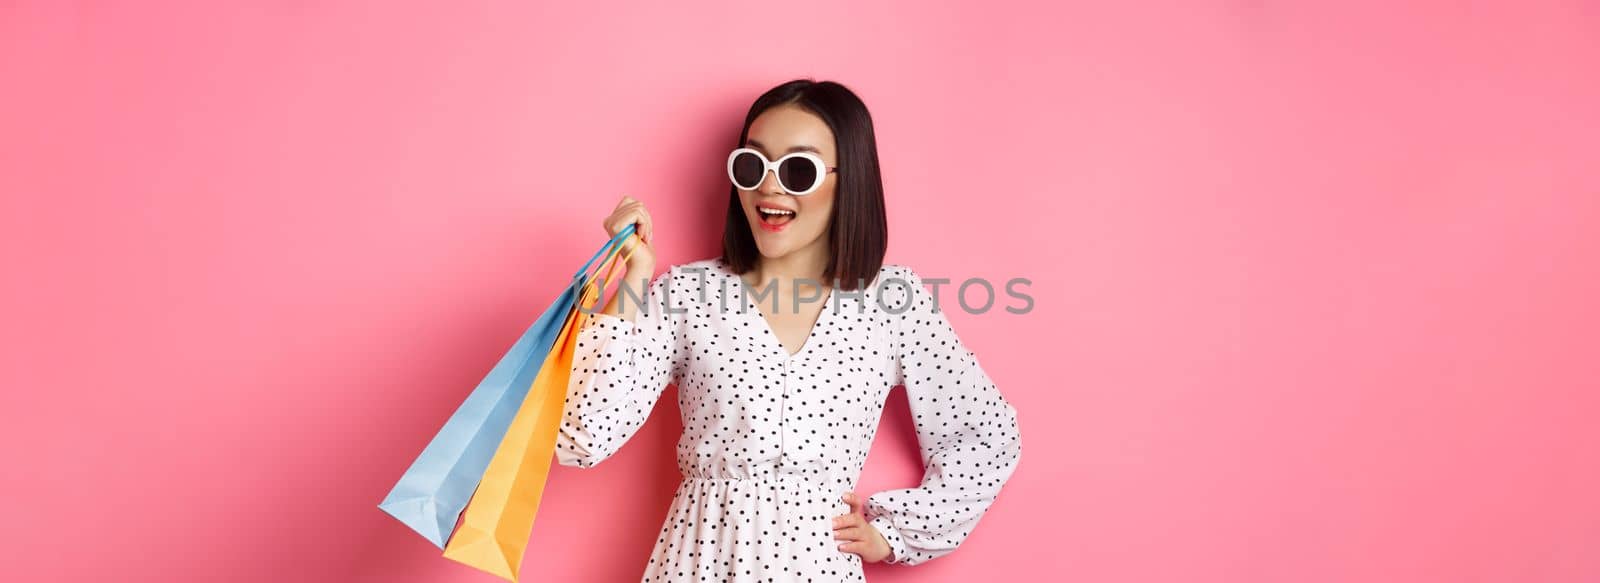 Happy modern asian woman going shopping in malls, holding bags with clothes and smiling, wearing sunglasses, standing over pink background.